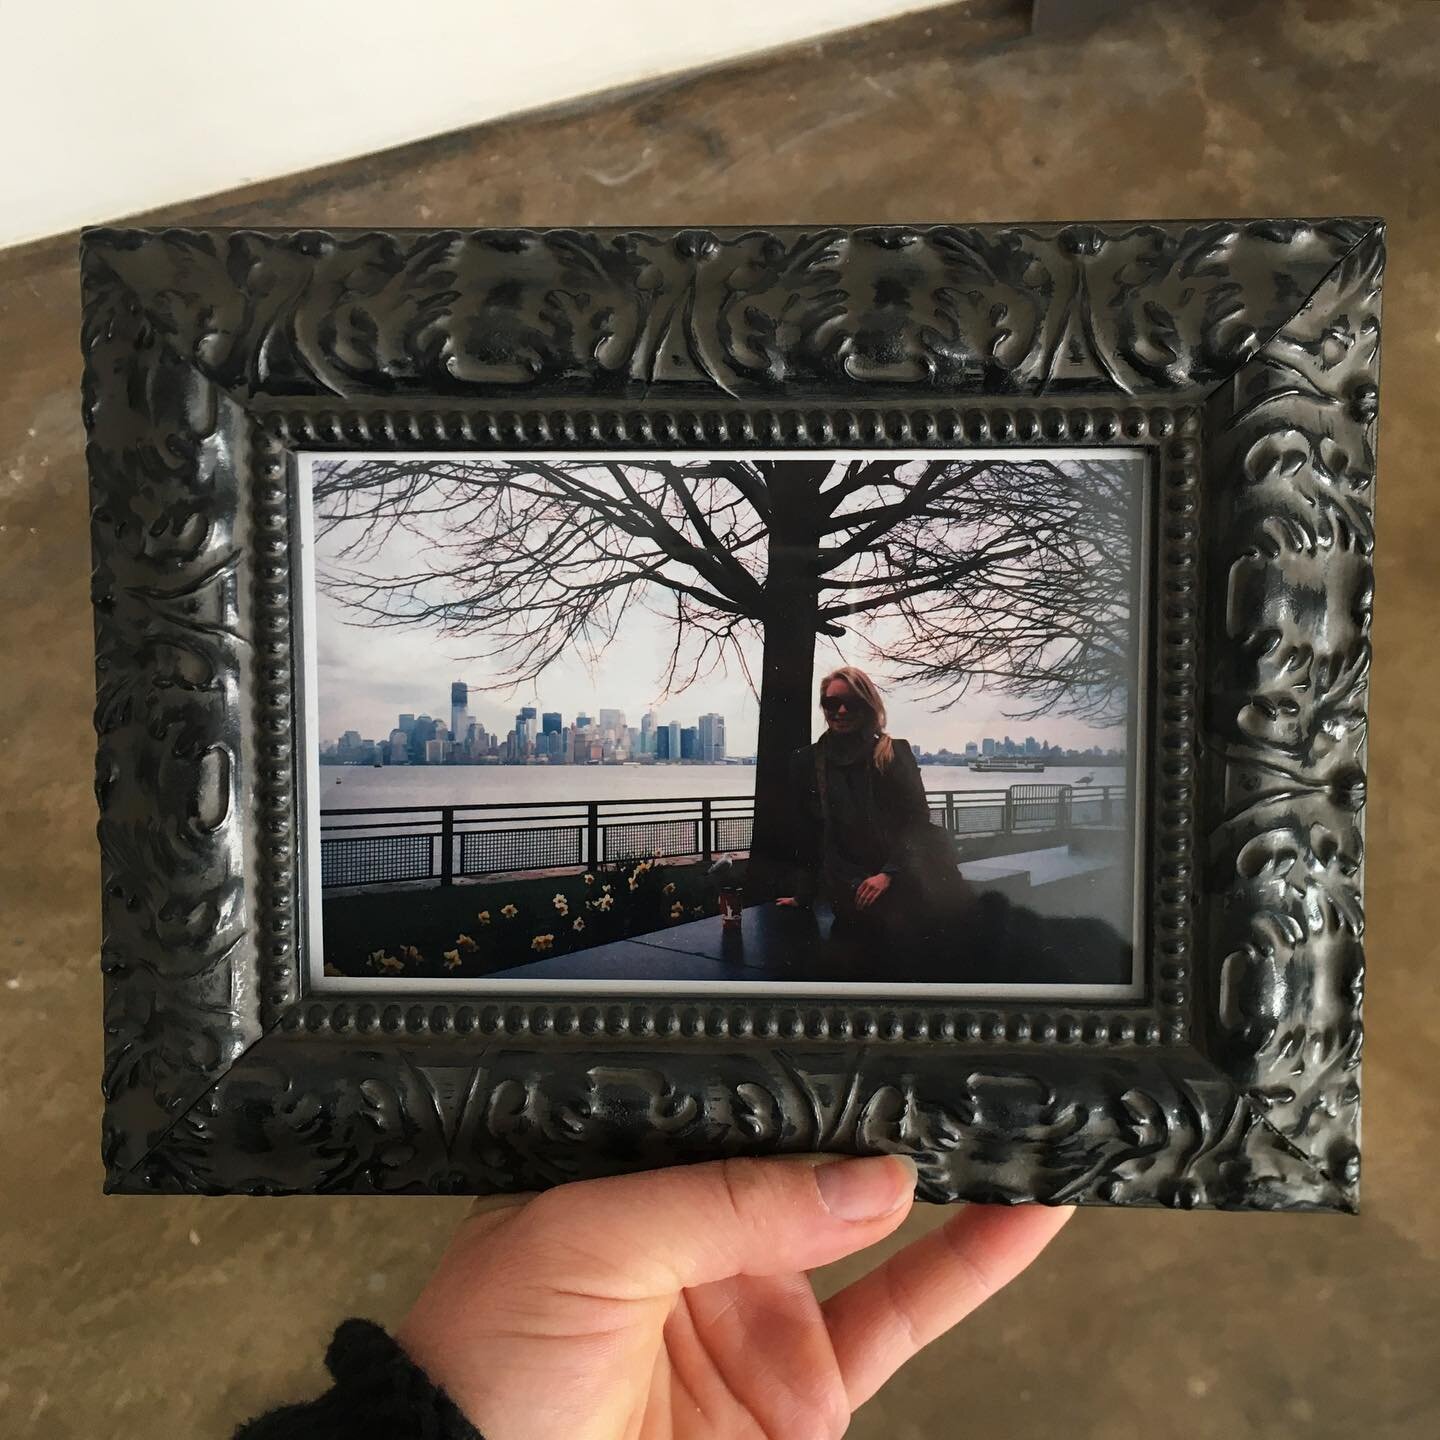 An assortment of photo frames are now available in the shop! Just gotta switch out these stock photos to pics of our favorite people 😉 @fabfhabie @hottiebaby5eva
🖼🖼🖼
#frameshop #handmade #smallbusiness #shoplocal #foxvalley #customframing